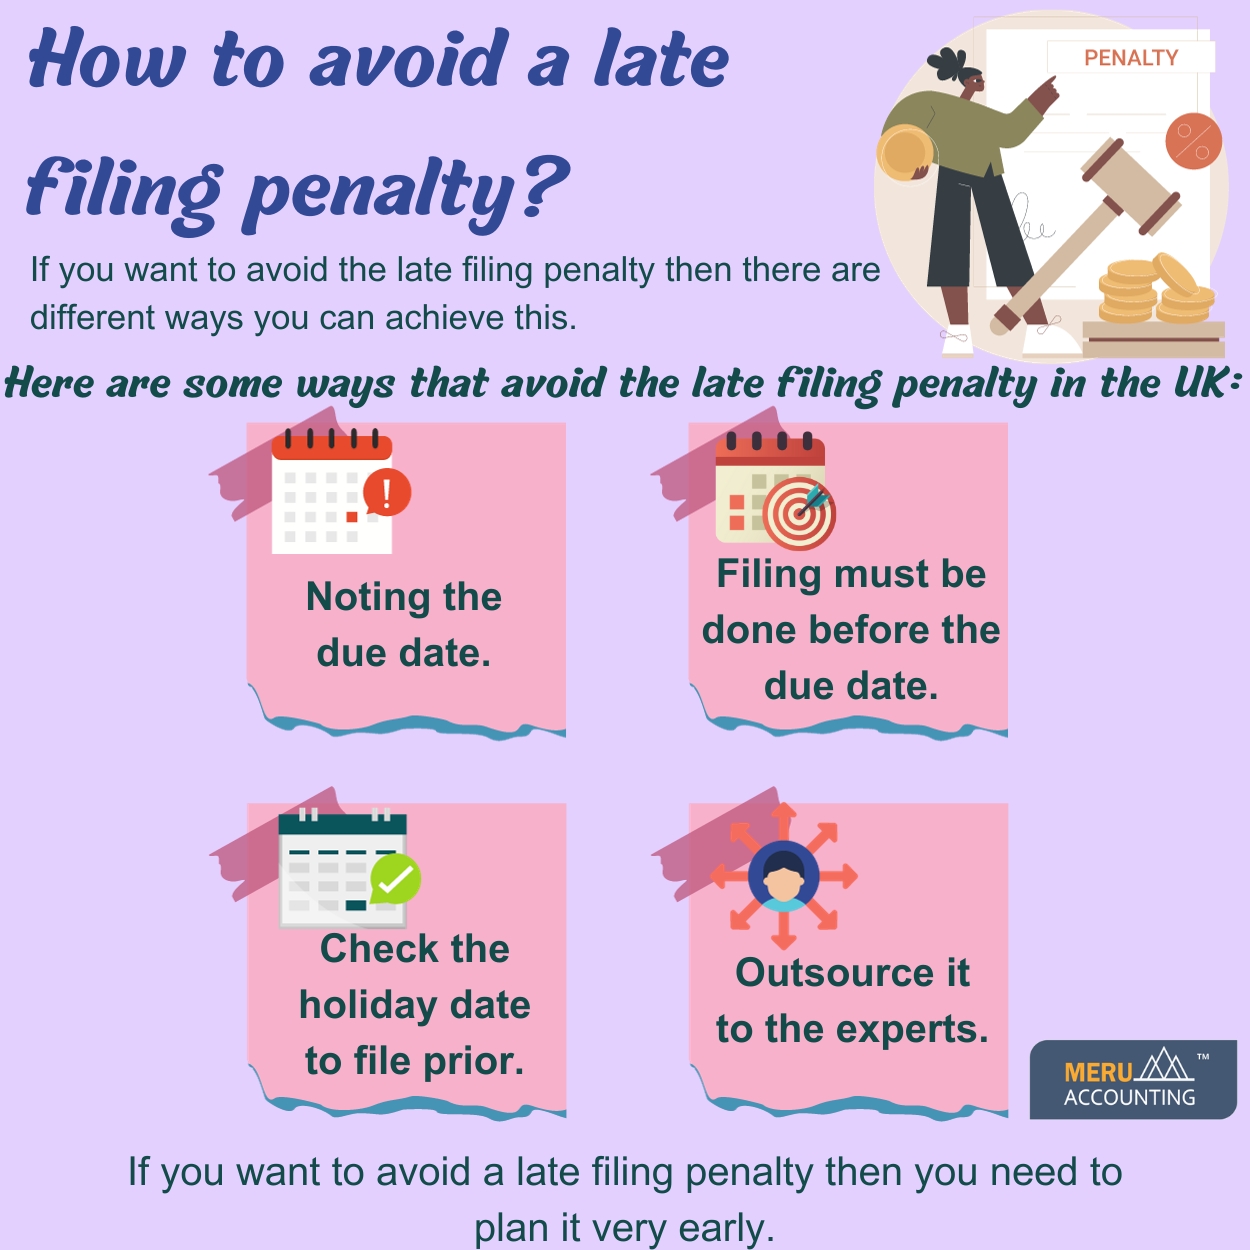 How to avoid a late filing penalty1250 BY 1250